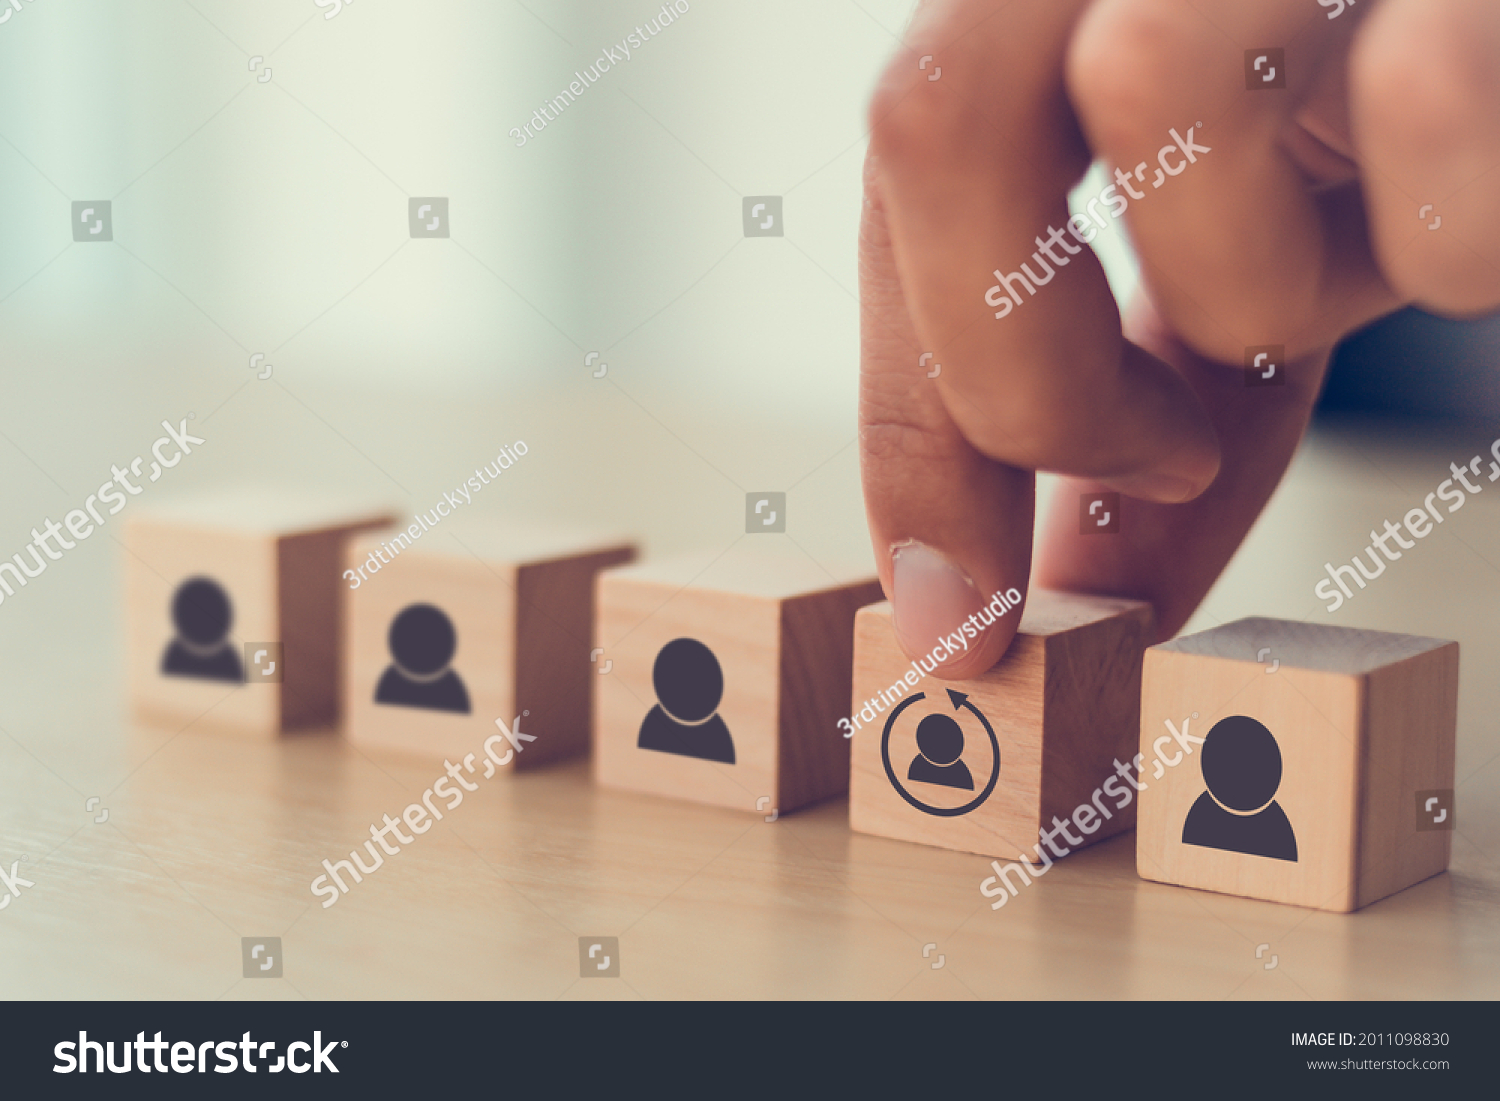 Re-skill concept to training employees on an entirely new set of skills for business growth and digital transformation. Man holds wood cube with re-skill icon on many staff icon symbol;  Copy space.  #2011098830